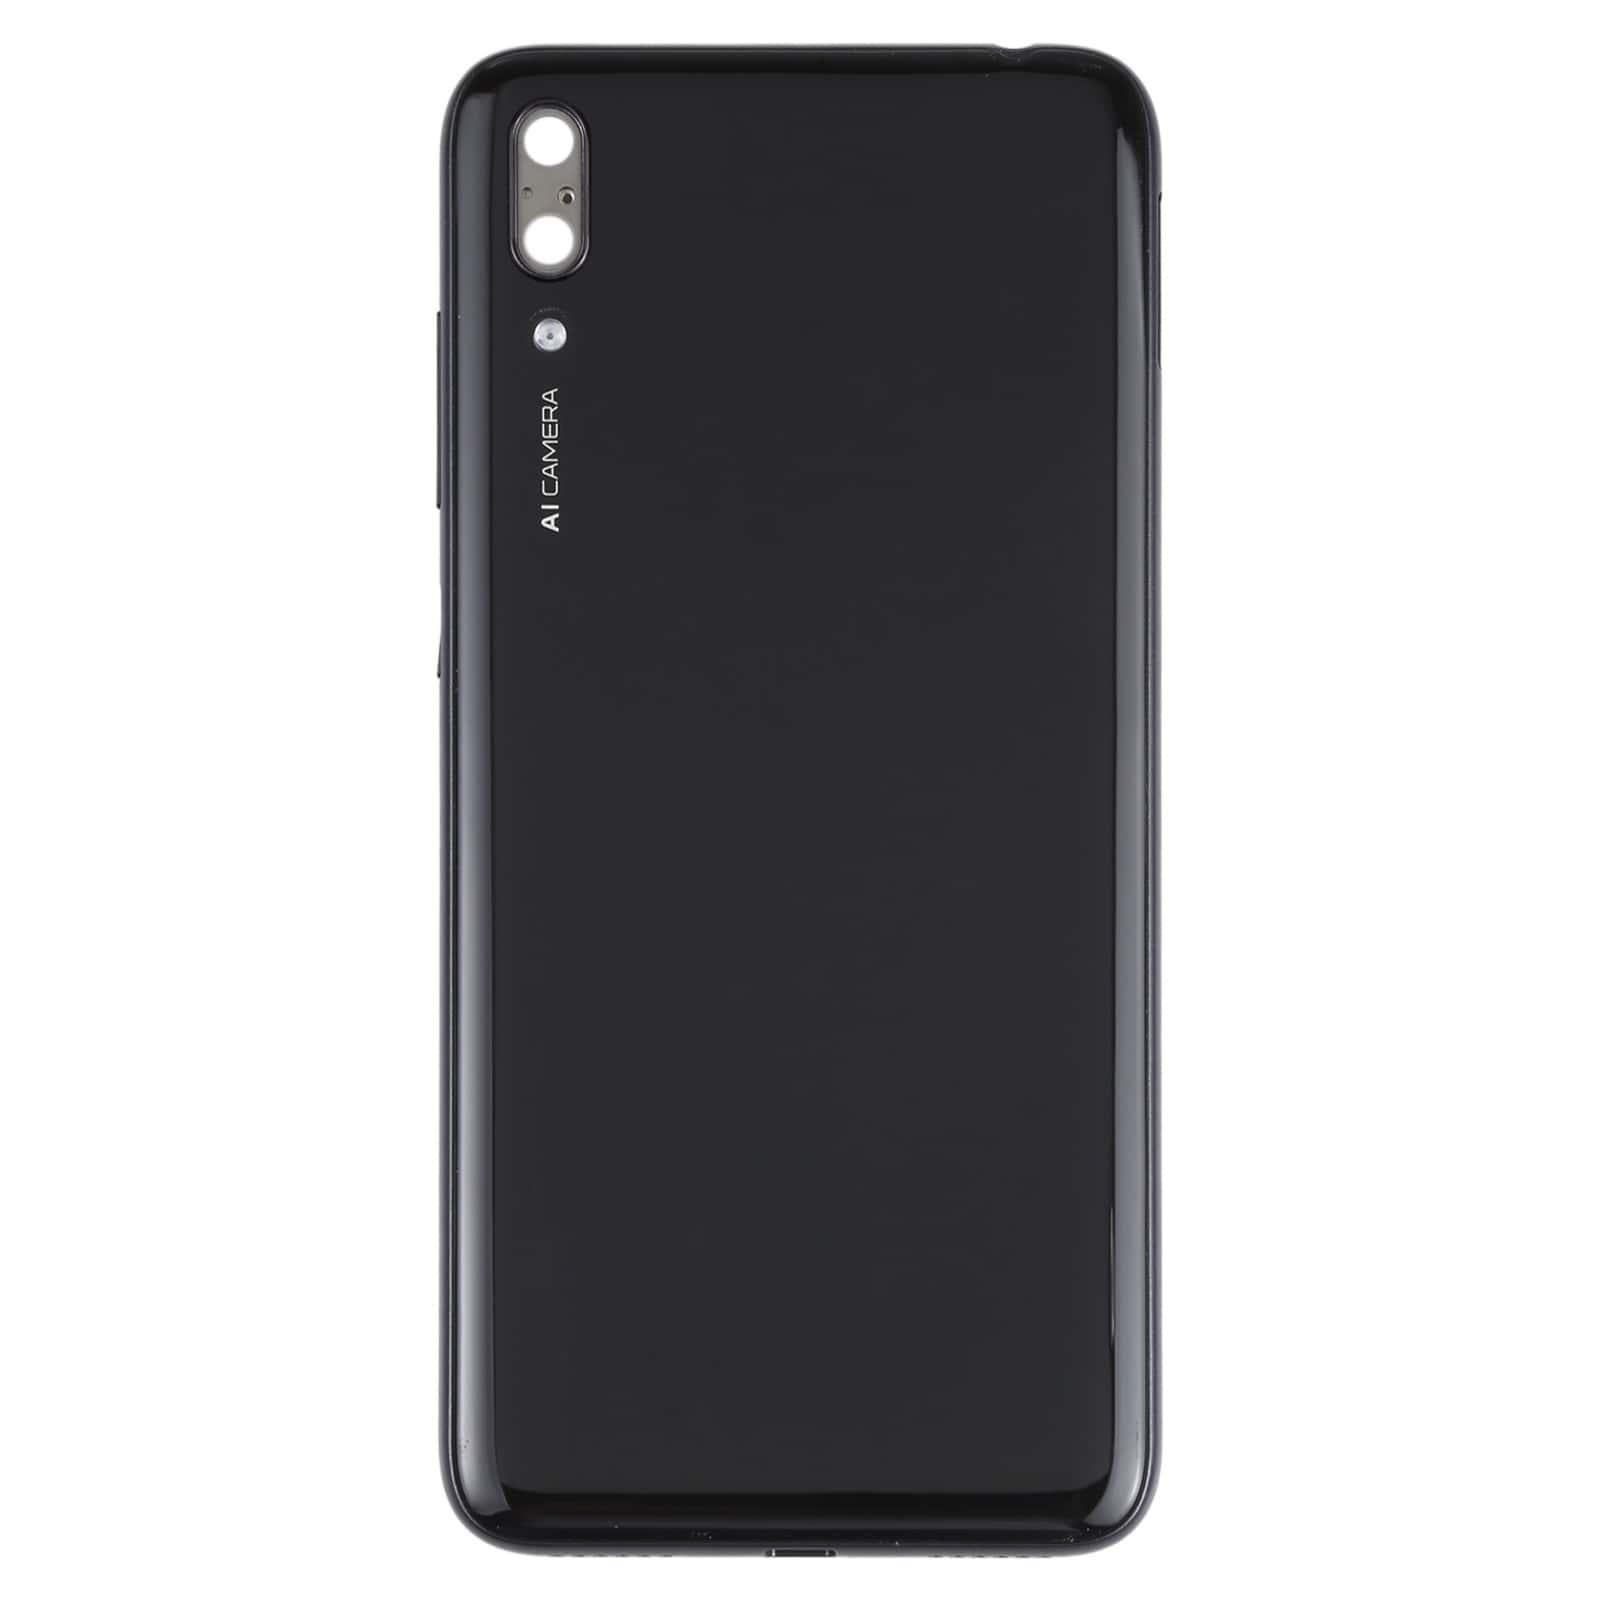 Back Panel Housing Body for Huawei Y7 2019 Black